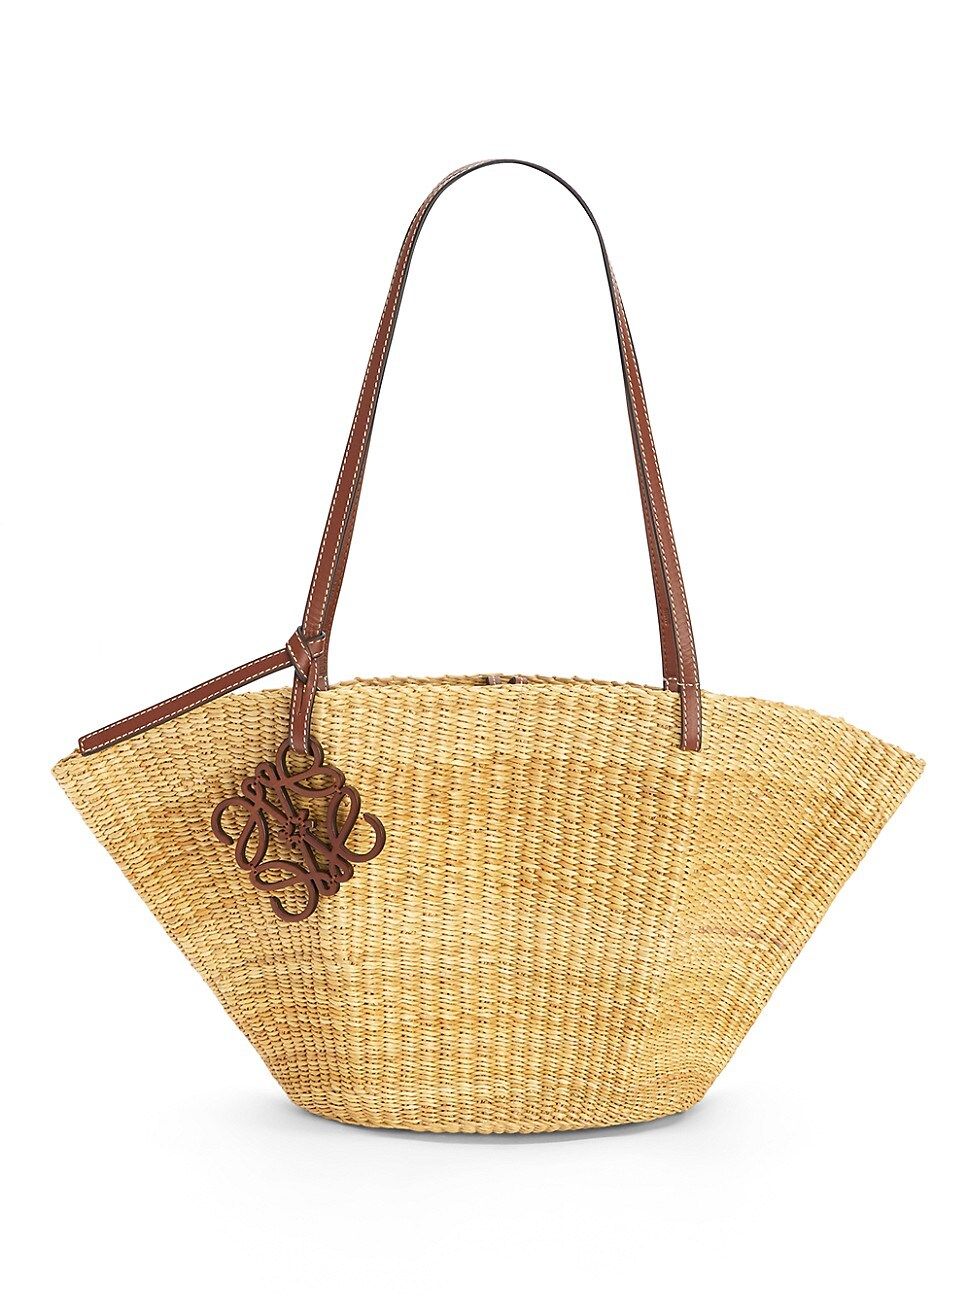 Loewe Women's Small Shell Leather-Trimmed Basket Bag - Natural | Saks Fifth Avenue